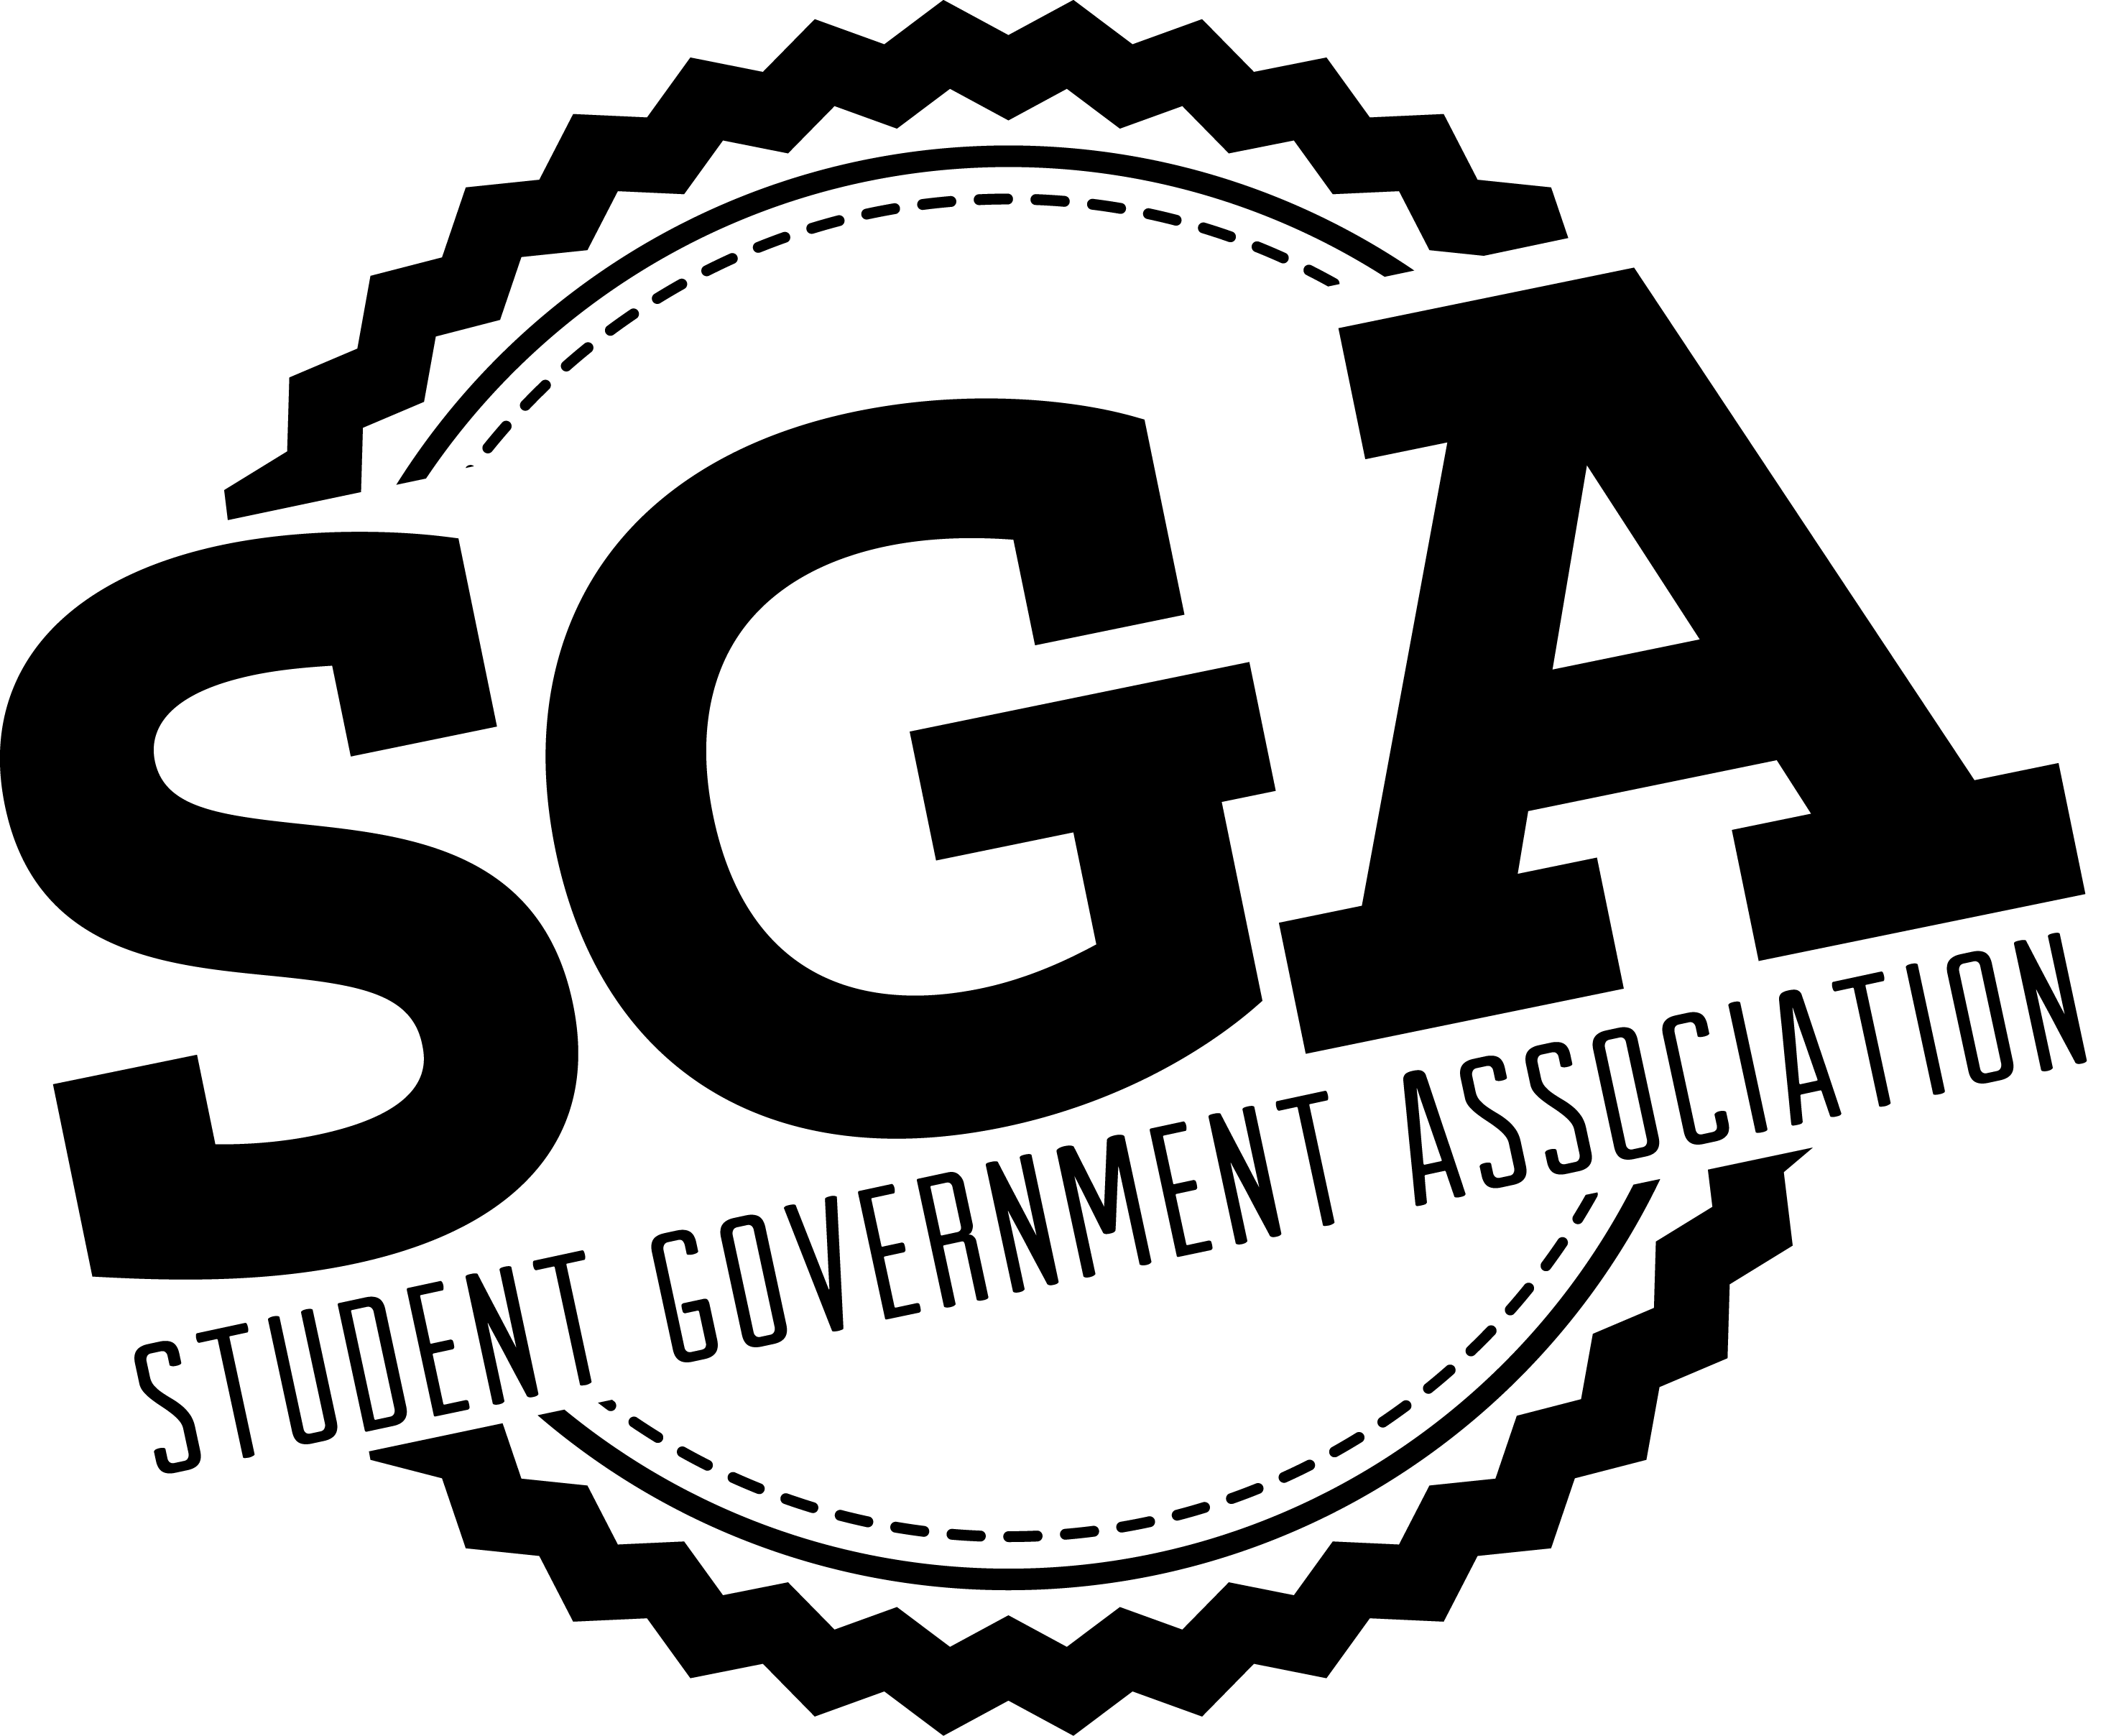 Demystifying SGA: Everything You Need To Know About This Keyword